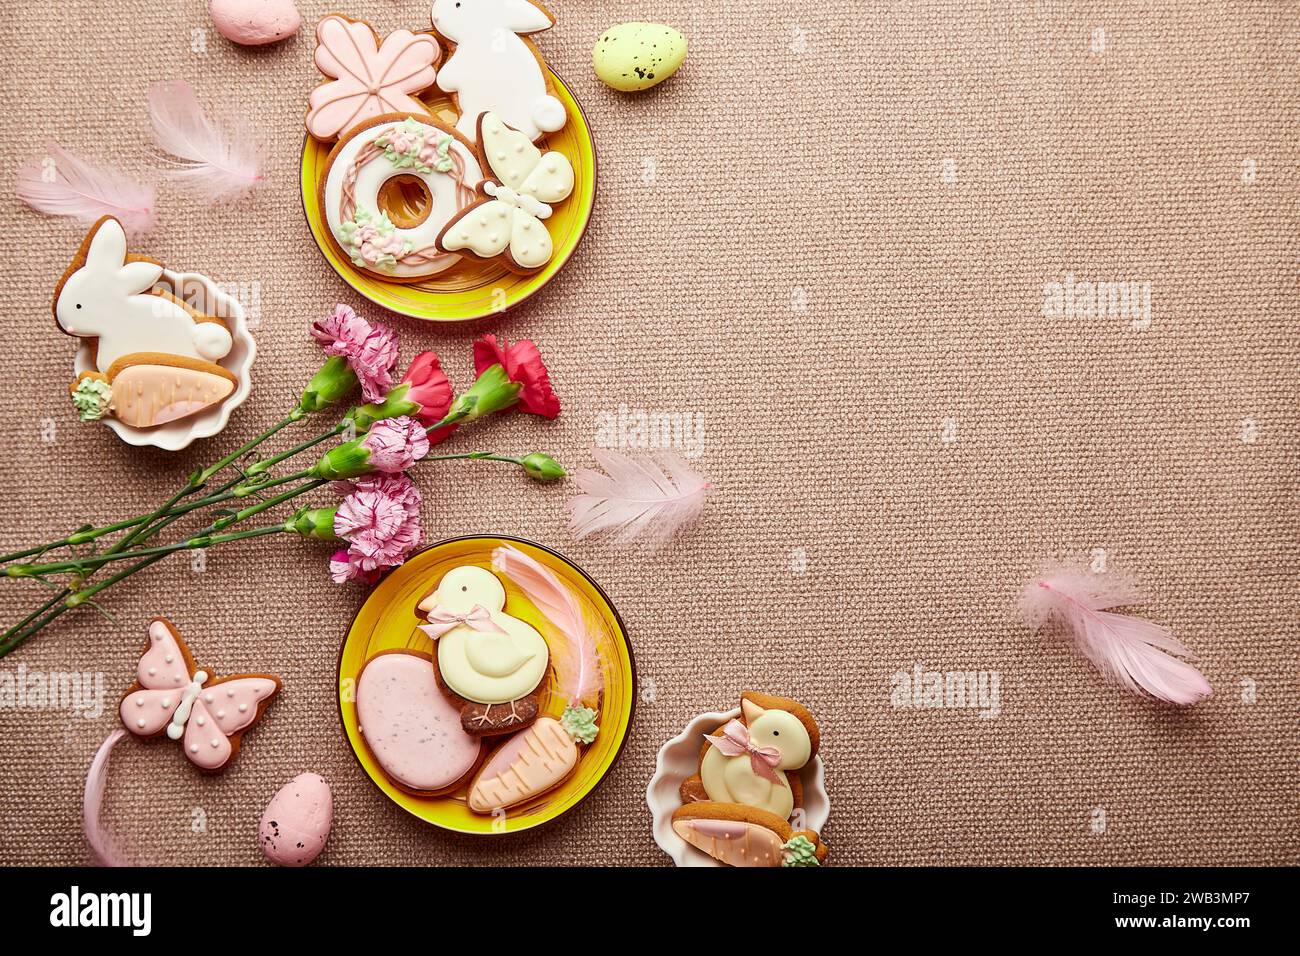 Aesthetic Easter flat lay with copy space. Decorated Easter cookies, pink flowers with feathers. Spring background. Stock Photo